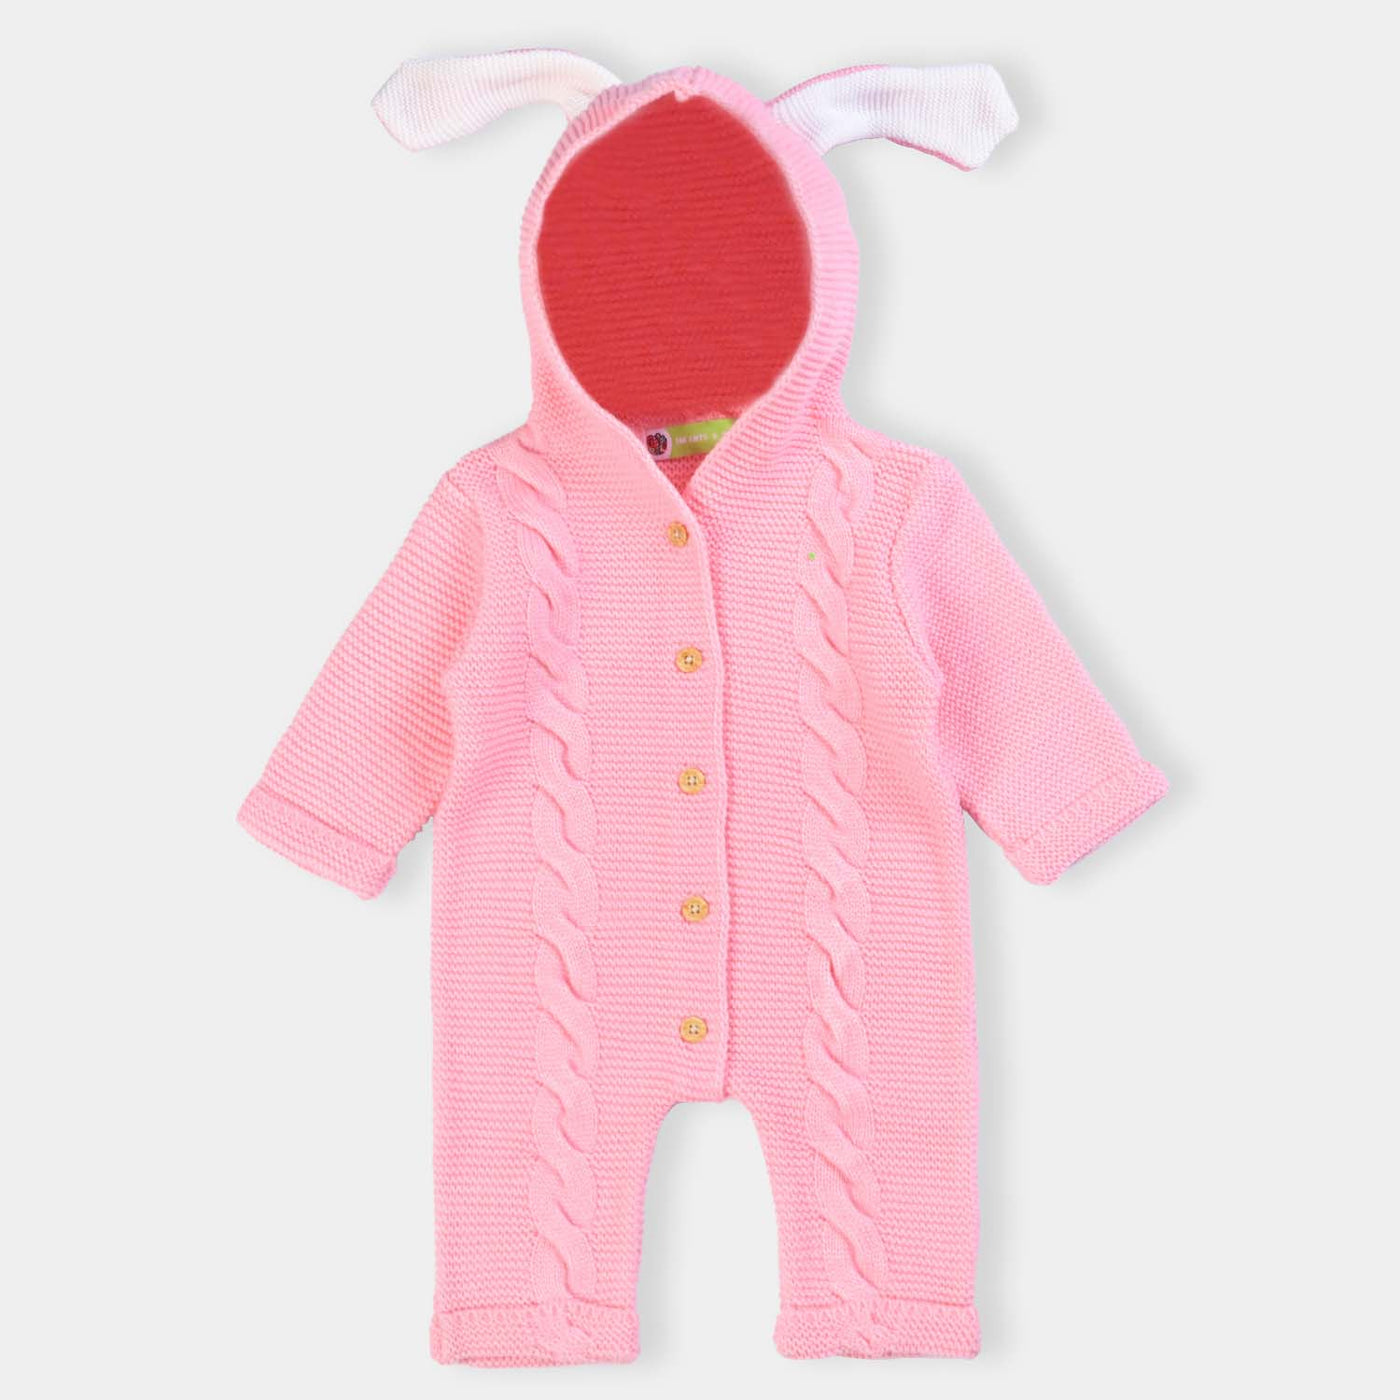 Infant Girls Knitted Romper-Pink